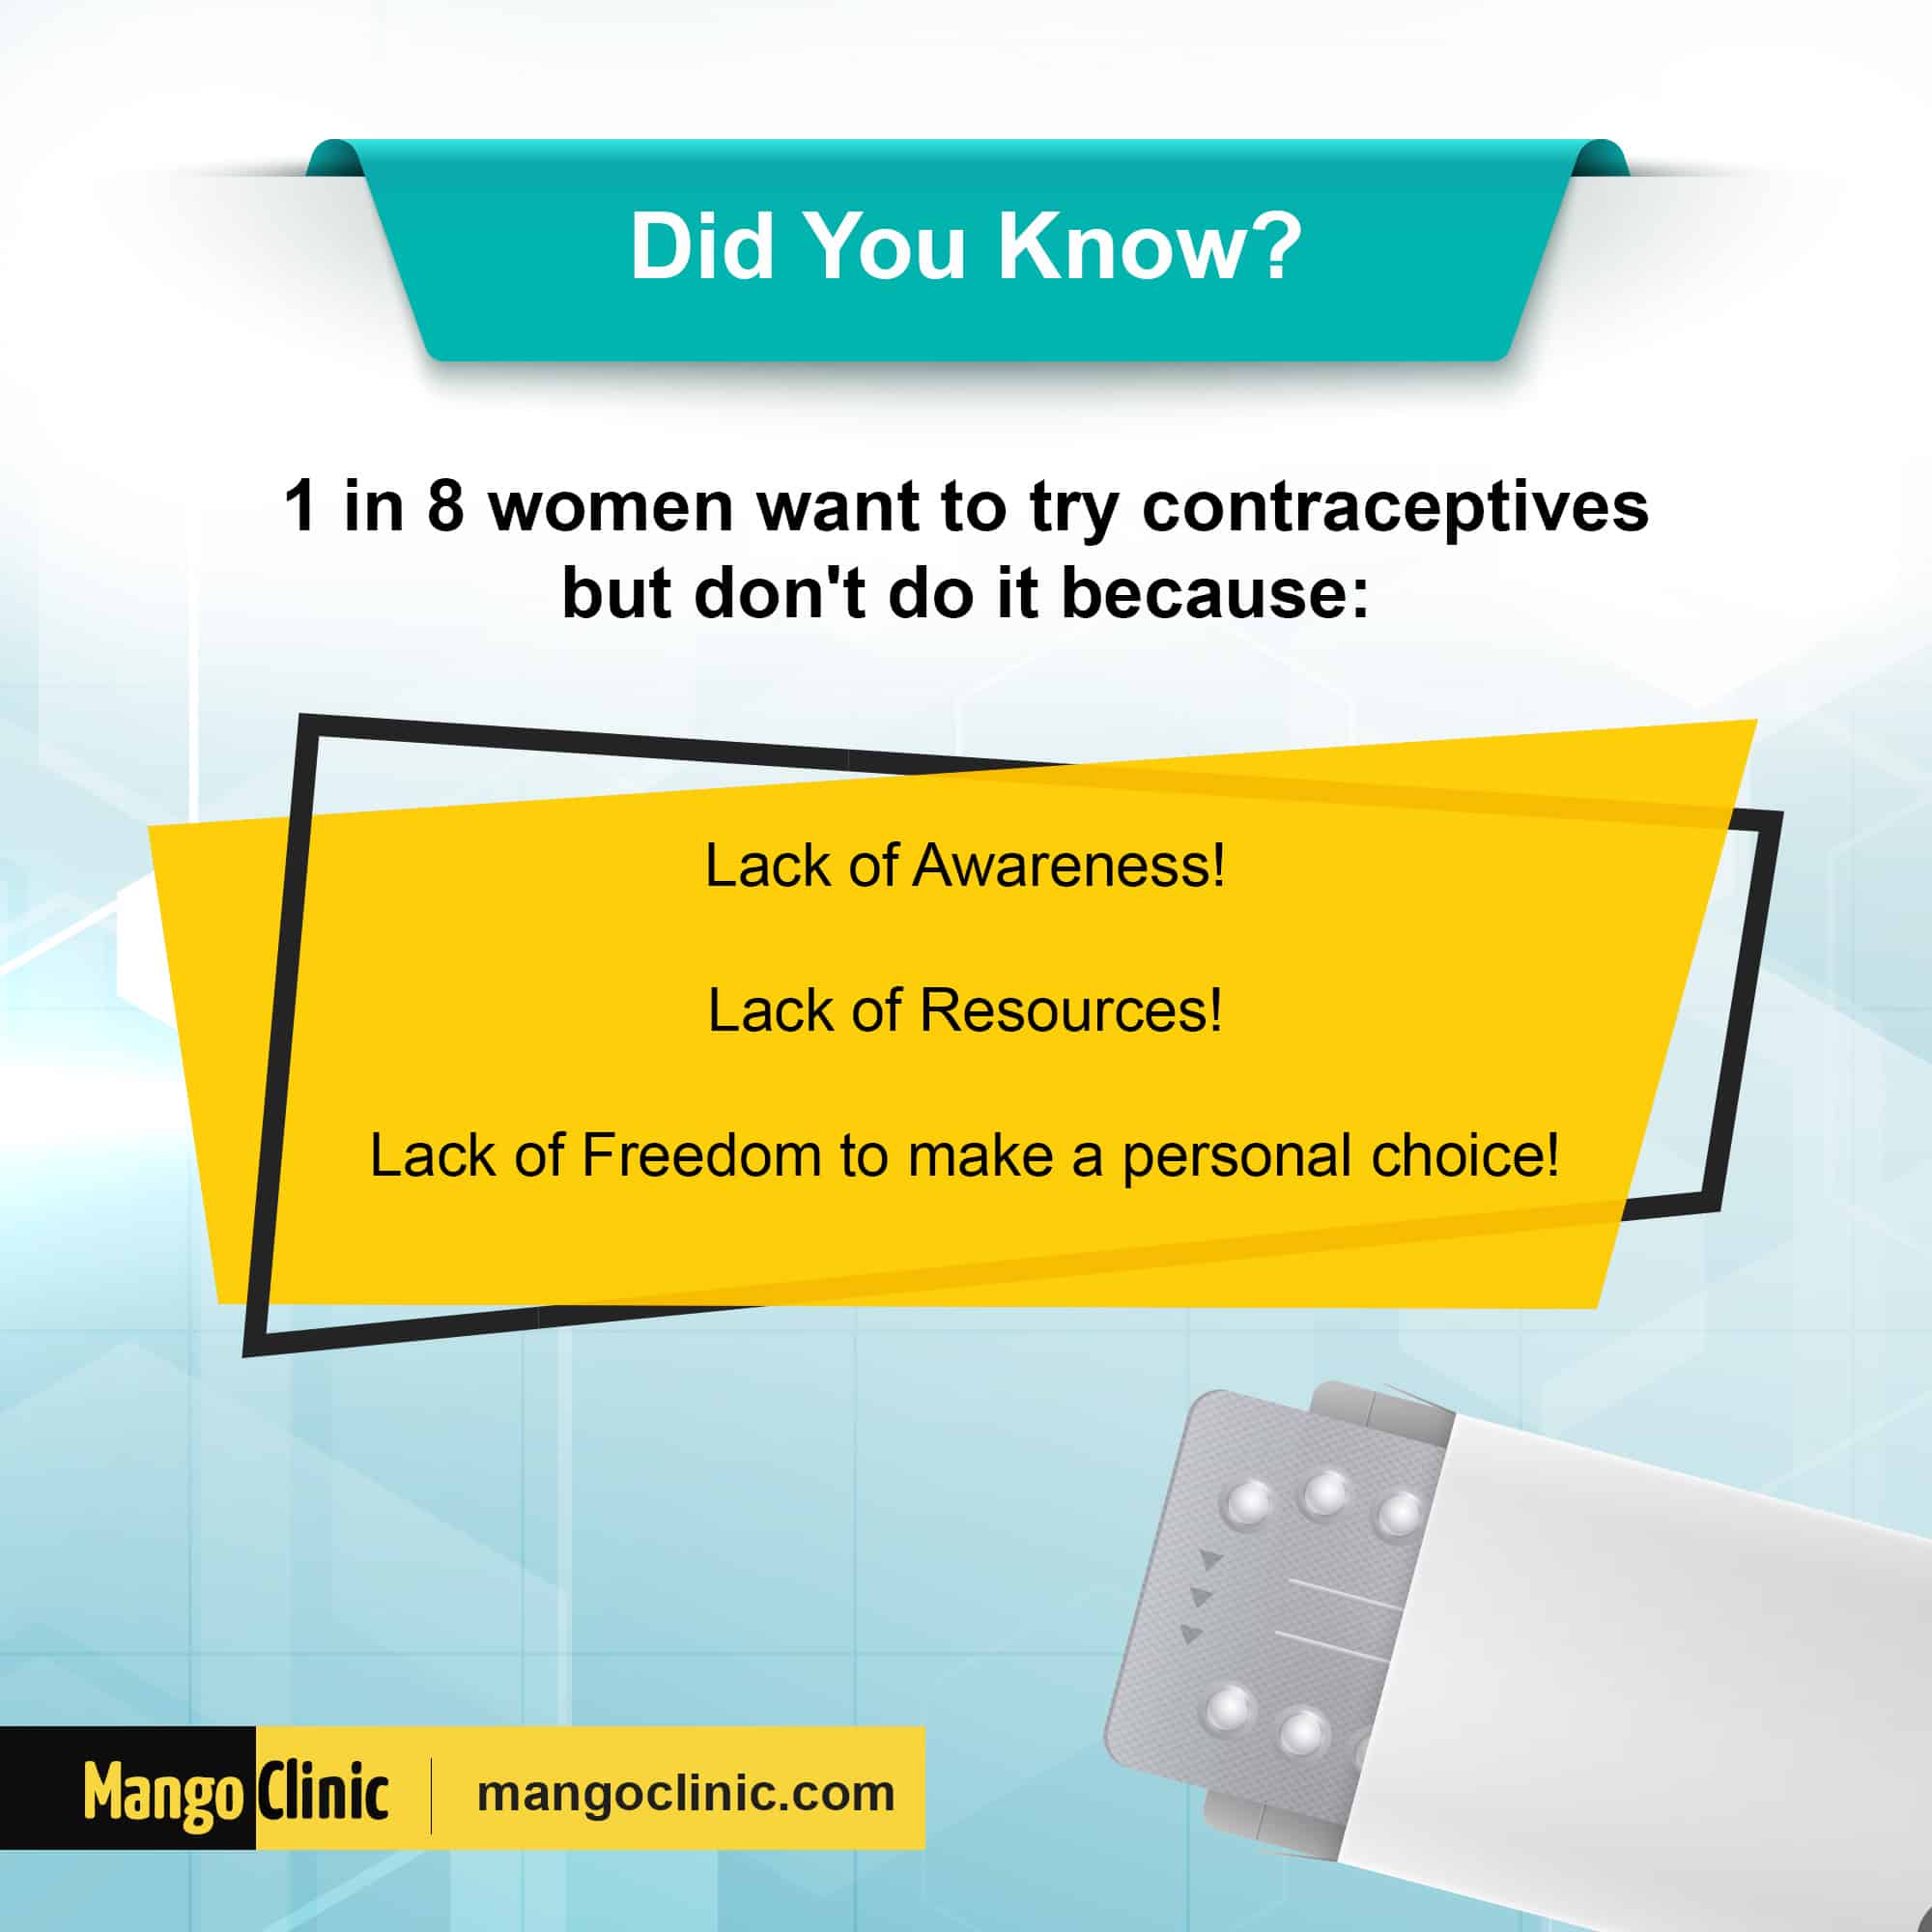 See Whatâs the Best Suitable Birth Control for You? Â· Mango Clinic